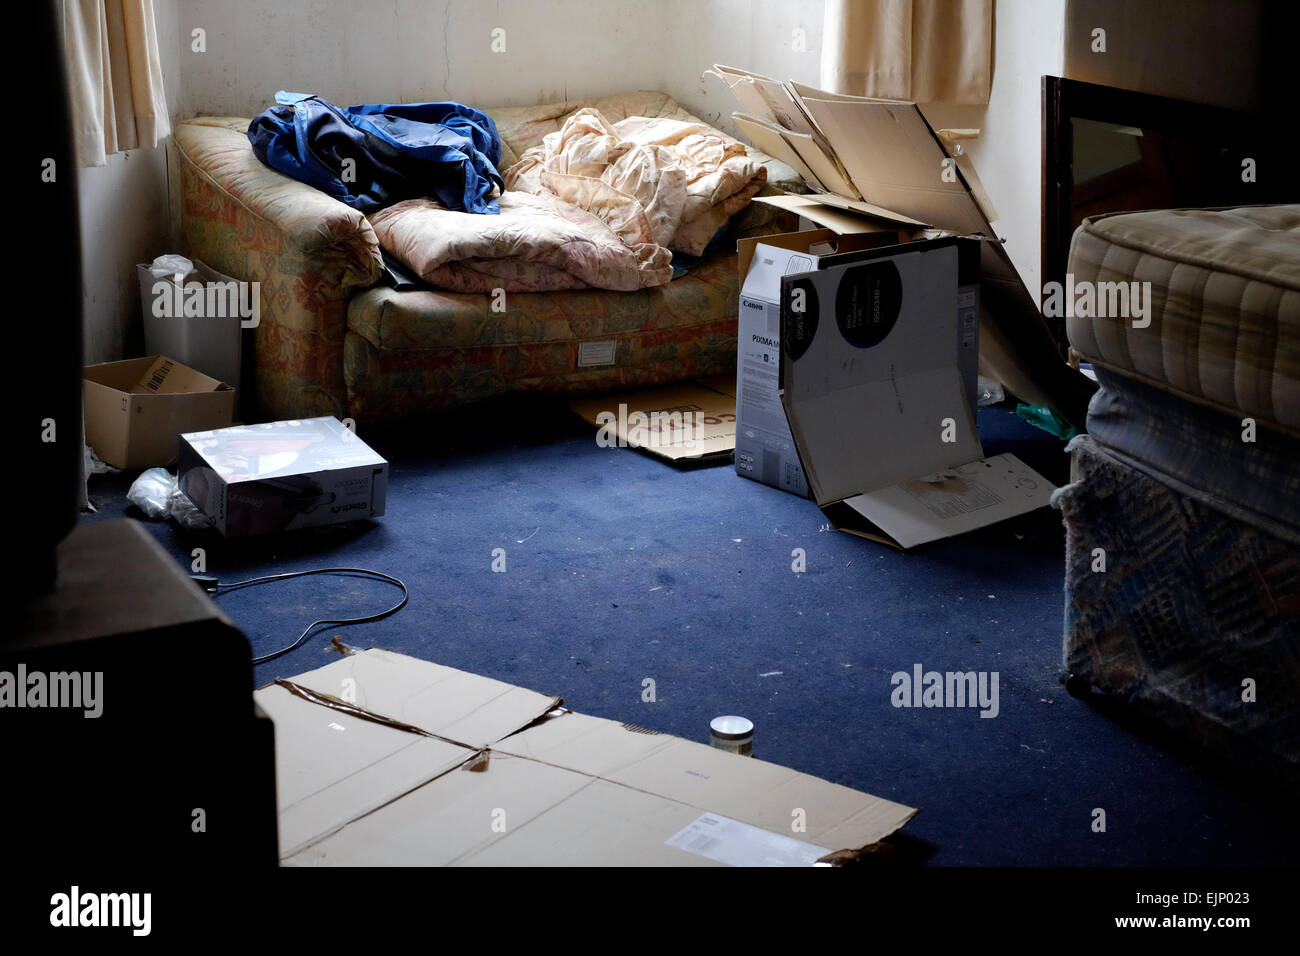 discarded rubbish in a filthy flat left by vacating tenants Stock Photo